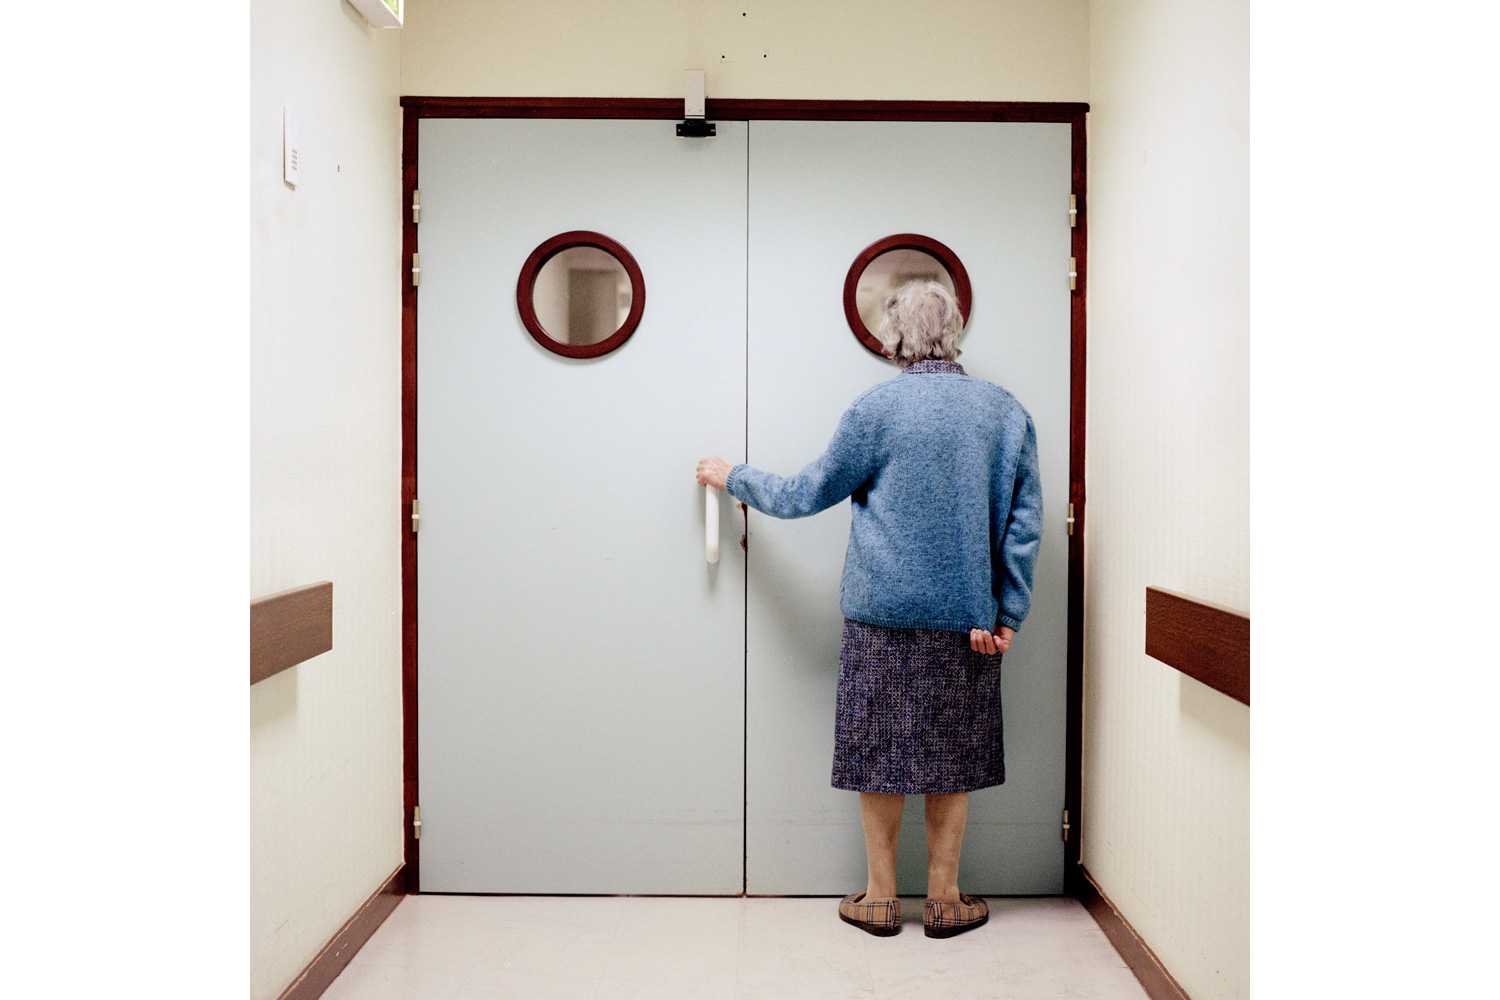 A resident stands in front of the ward’s locked exit door